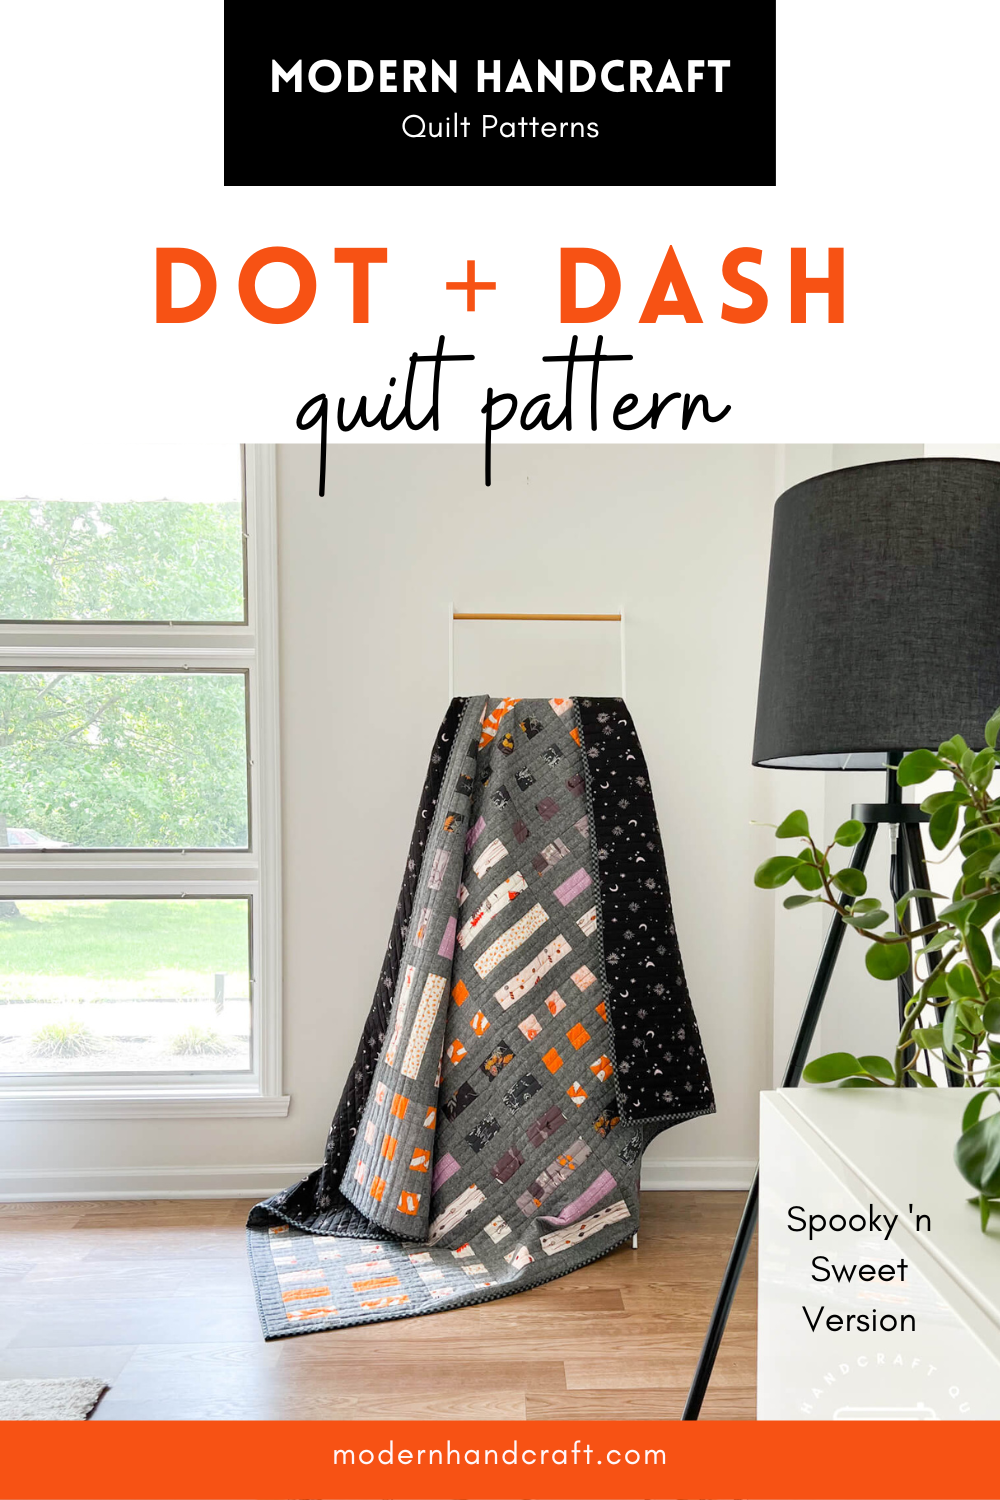 Dot and Dash Quilt - Spooky 'n Sweet Version by Modern Handcraft